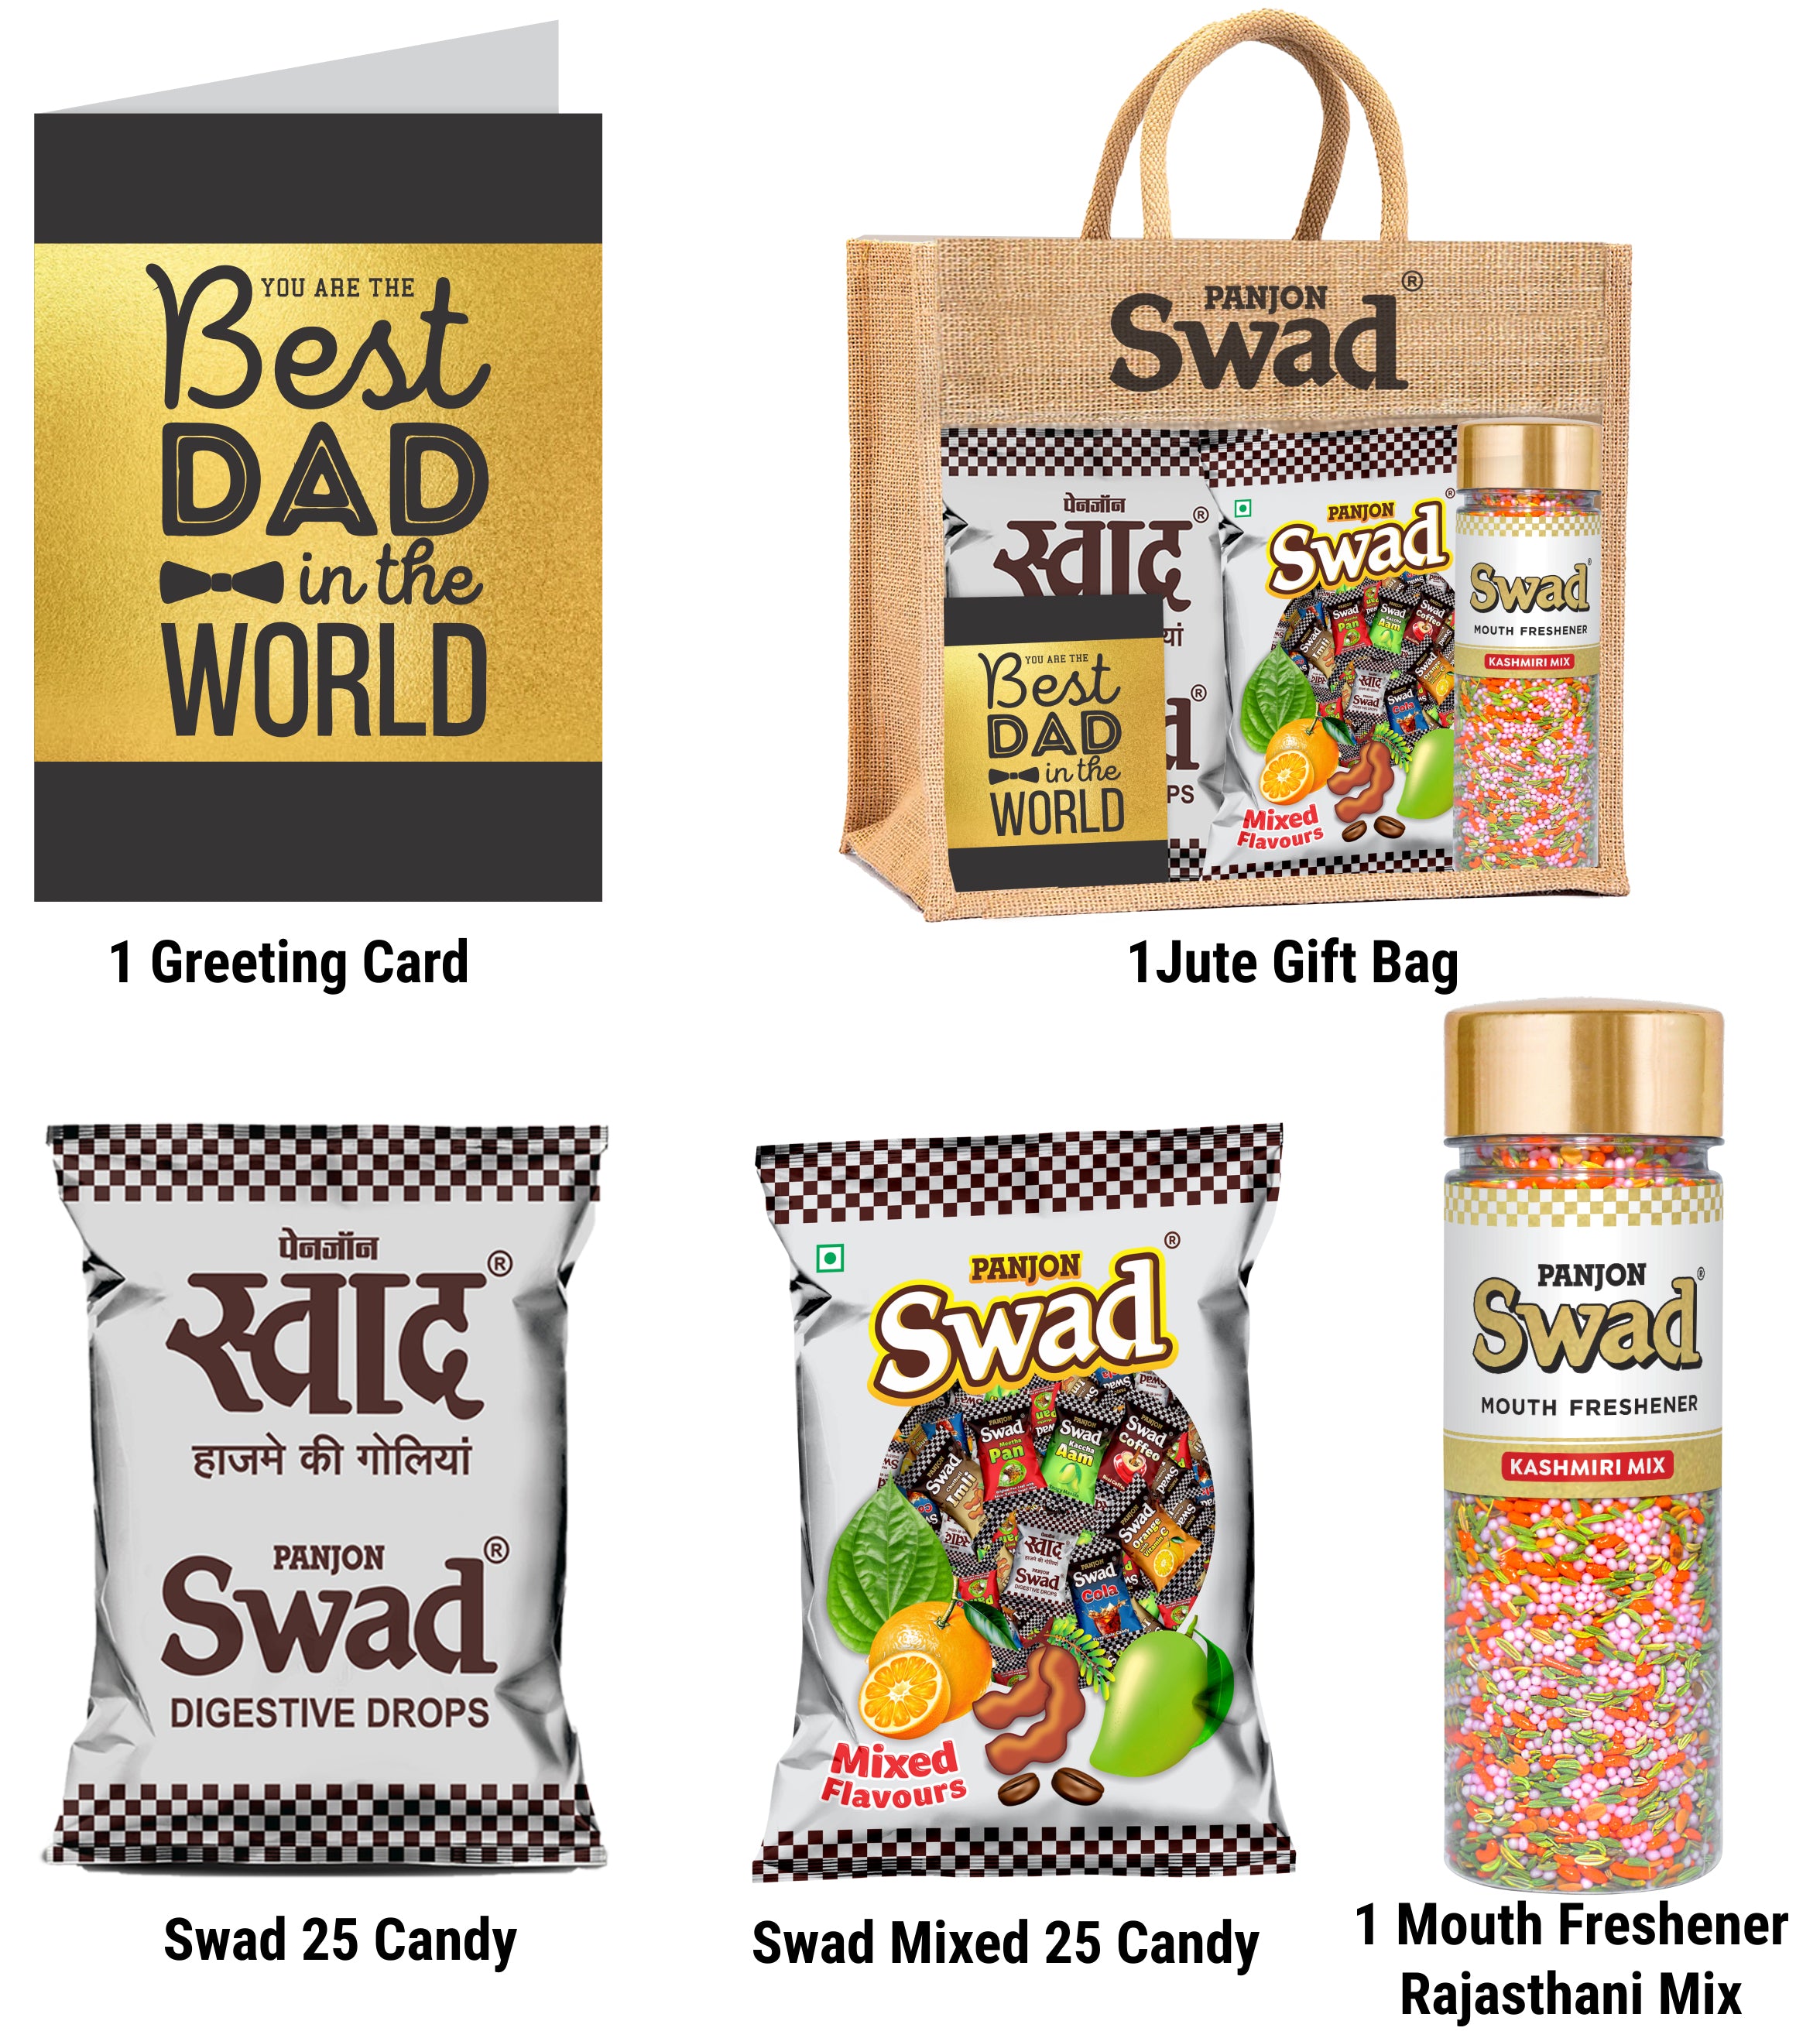 Swad Best Father/Dad Gift with Card (25 Swad Candy, 25 Mixed Toffee, Kashmiri Mix Mukhwas) in Jute Bag